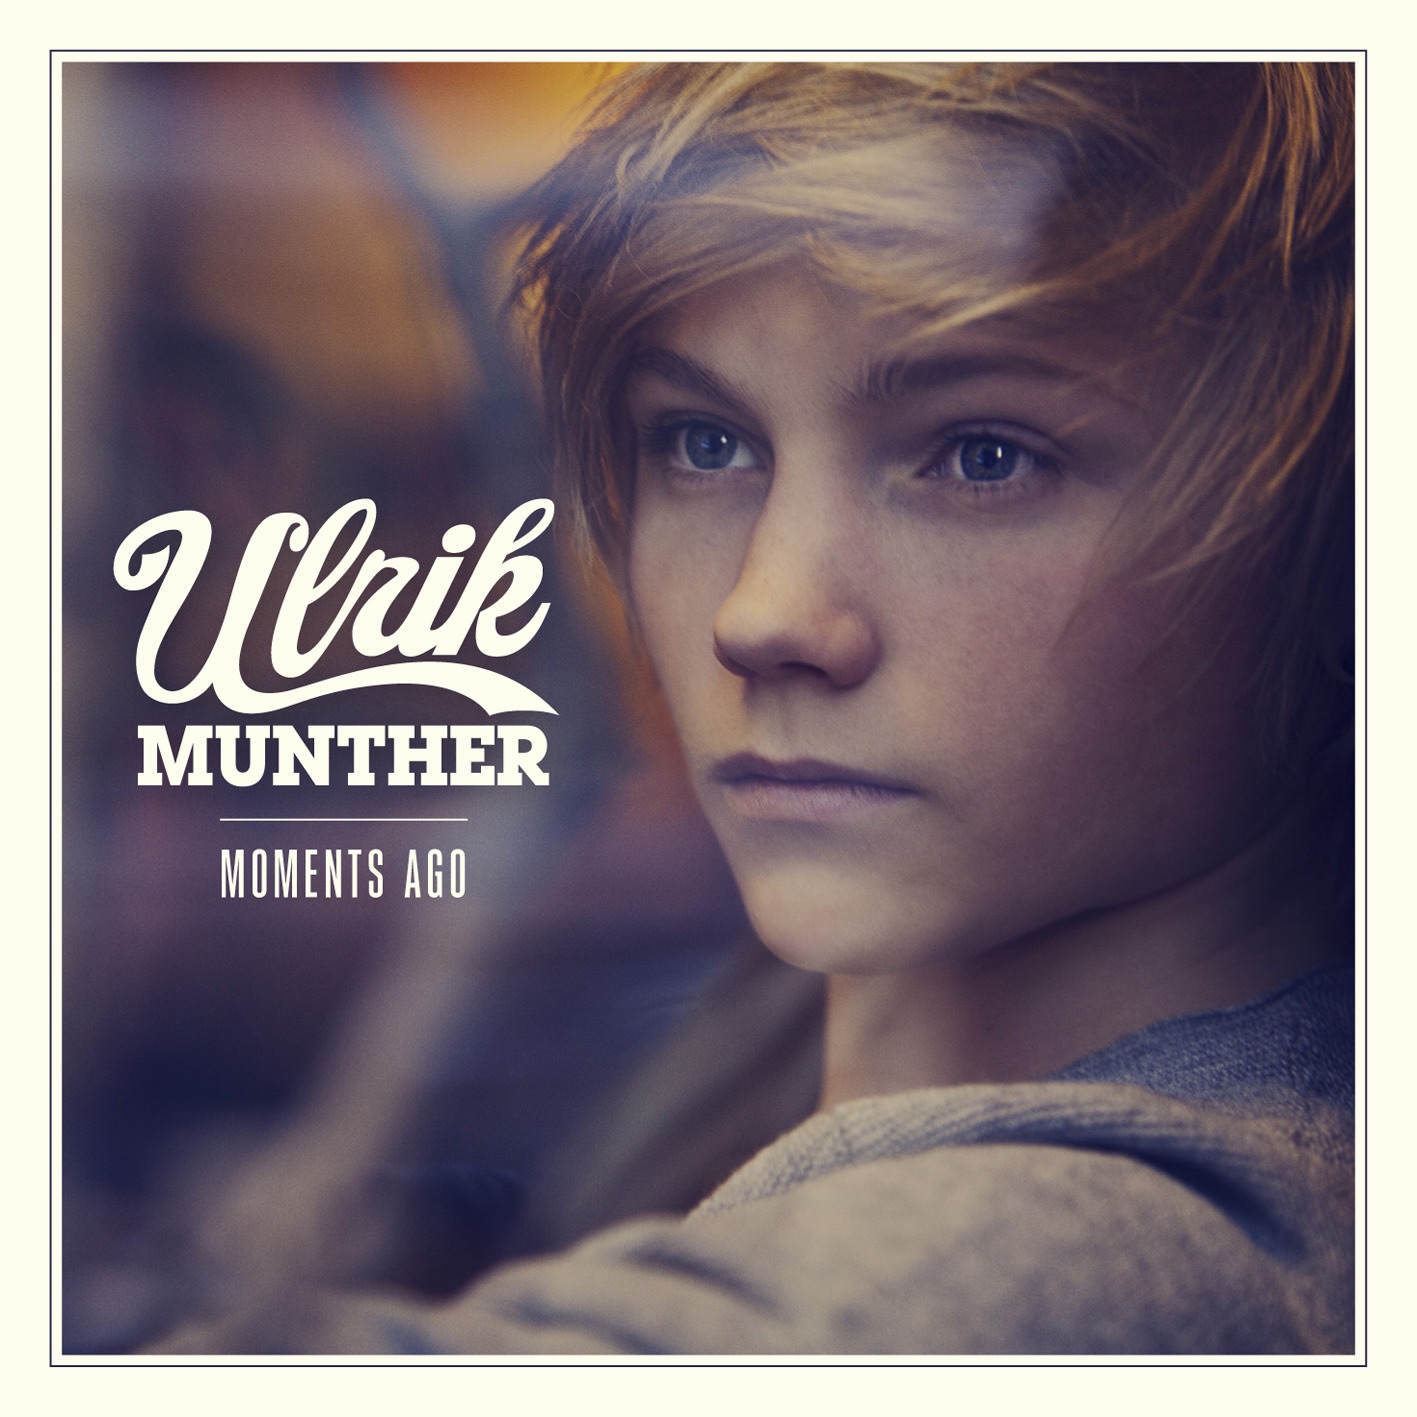 Ulrik Munther — Moments Ago cover artwork